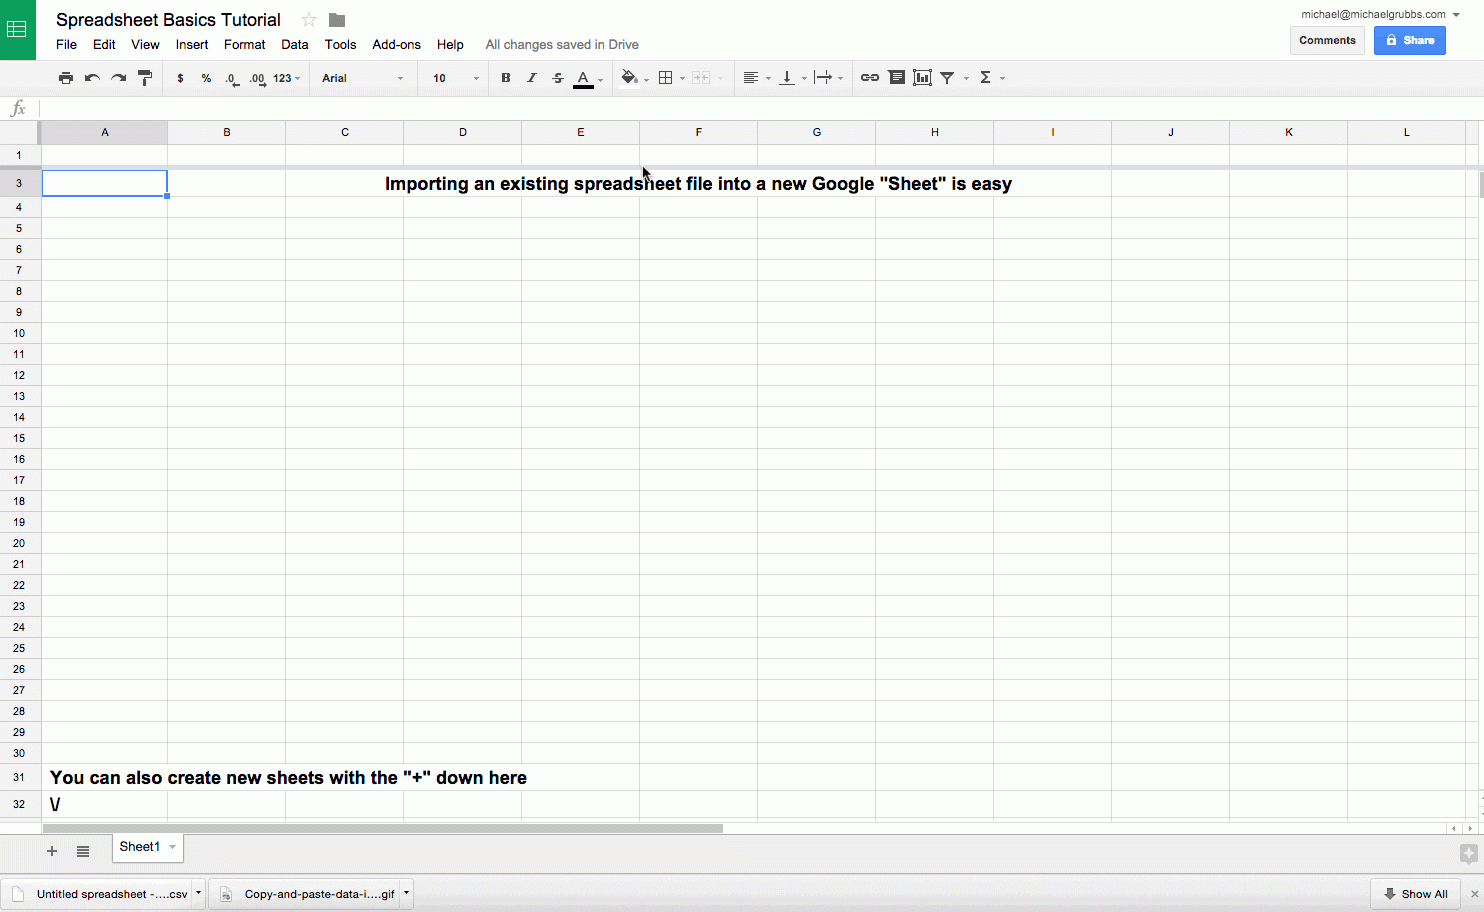 How To Get A Spreadsheet With Google Sheets 101: The Beginner's Guide To Online Spreadsheets  The